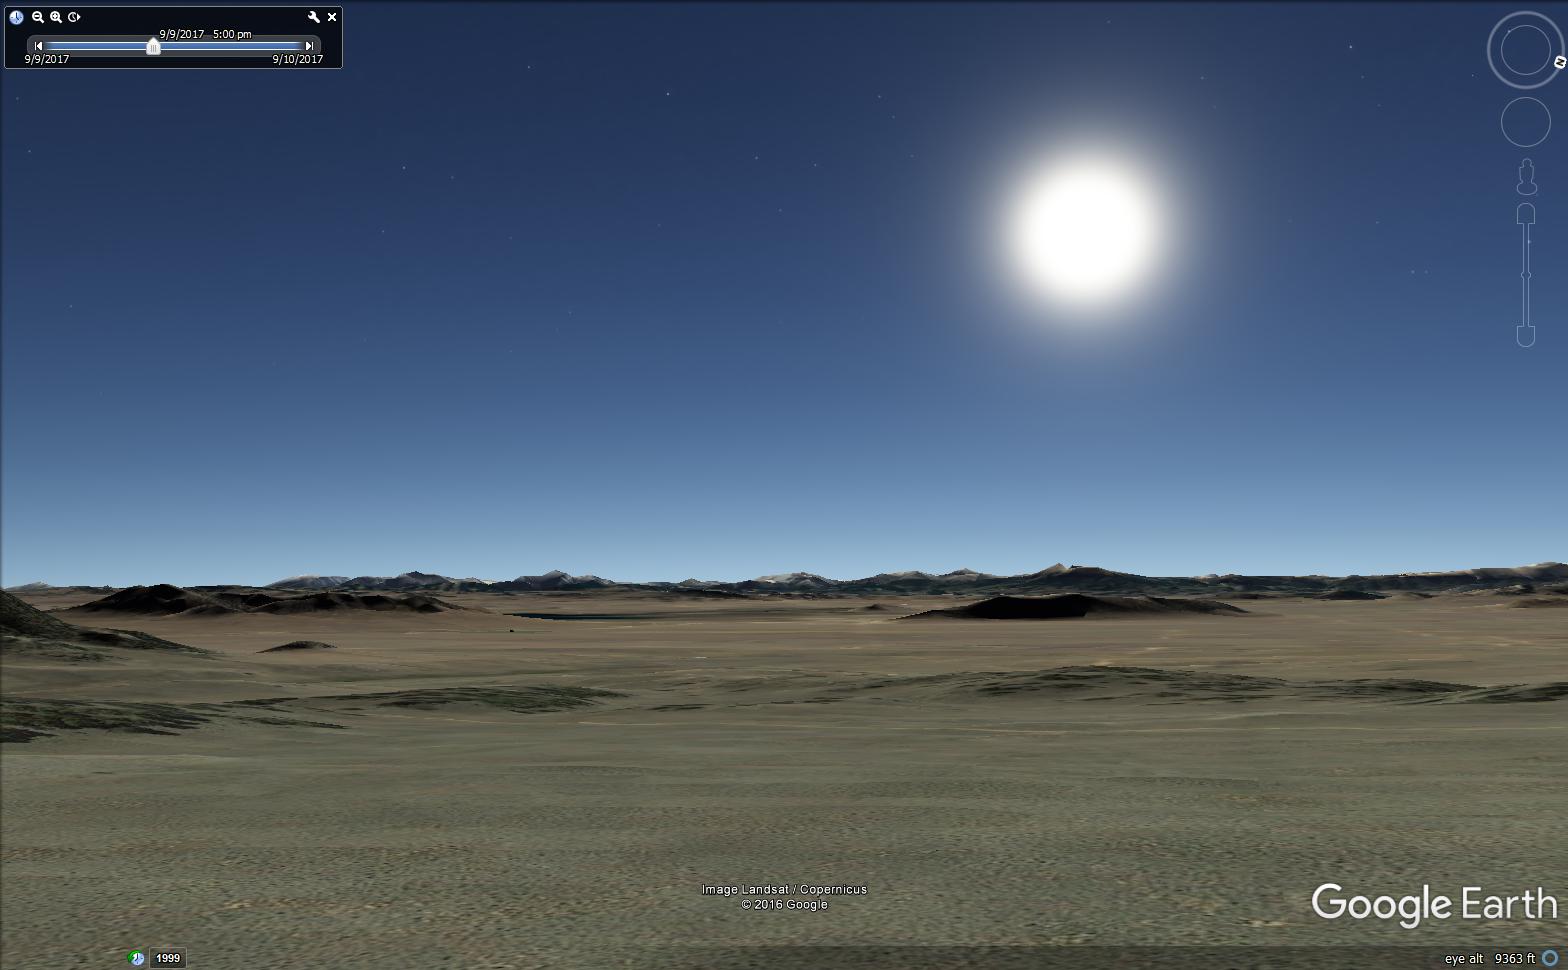 Google Earth calculated sun position for 9-9 at 1700.